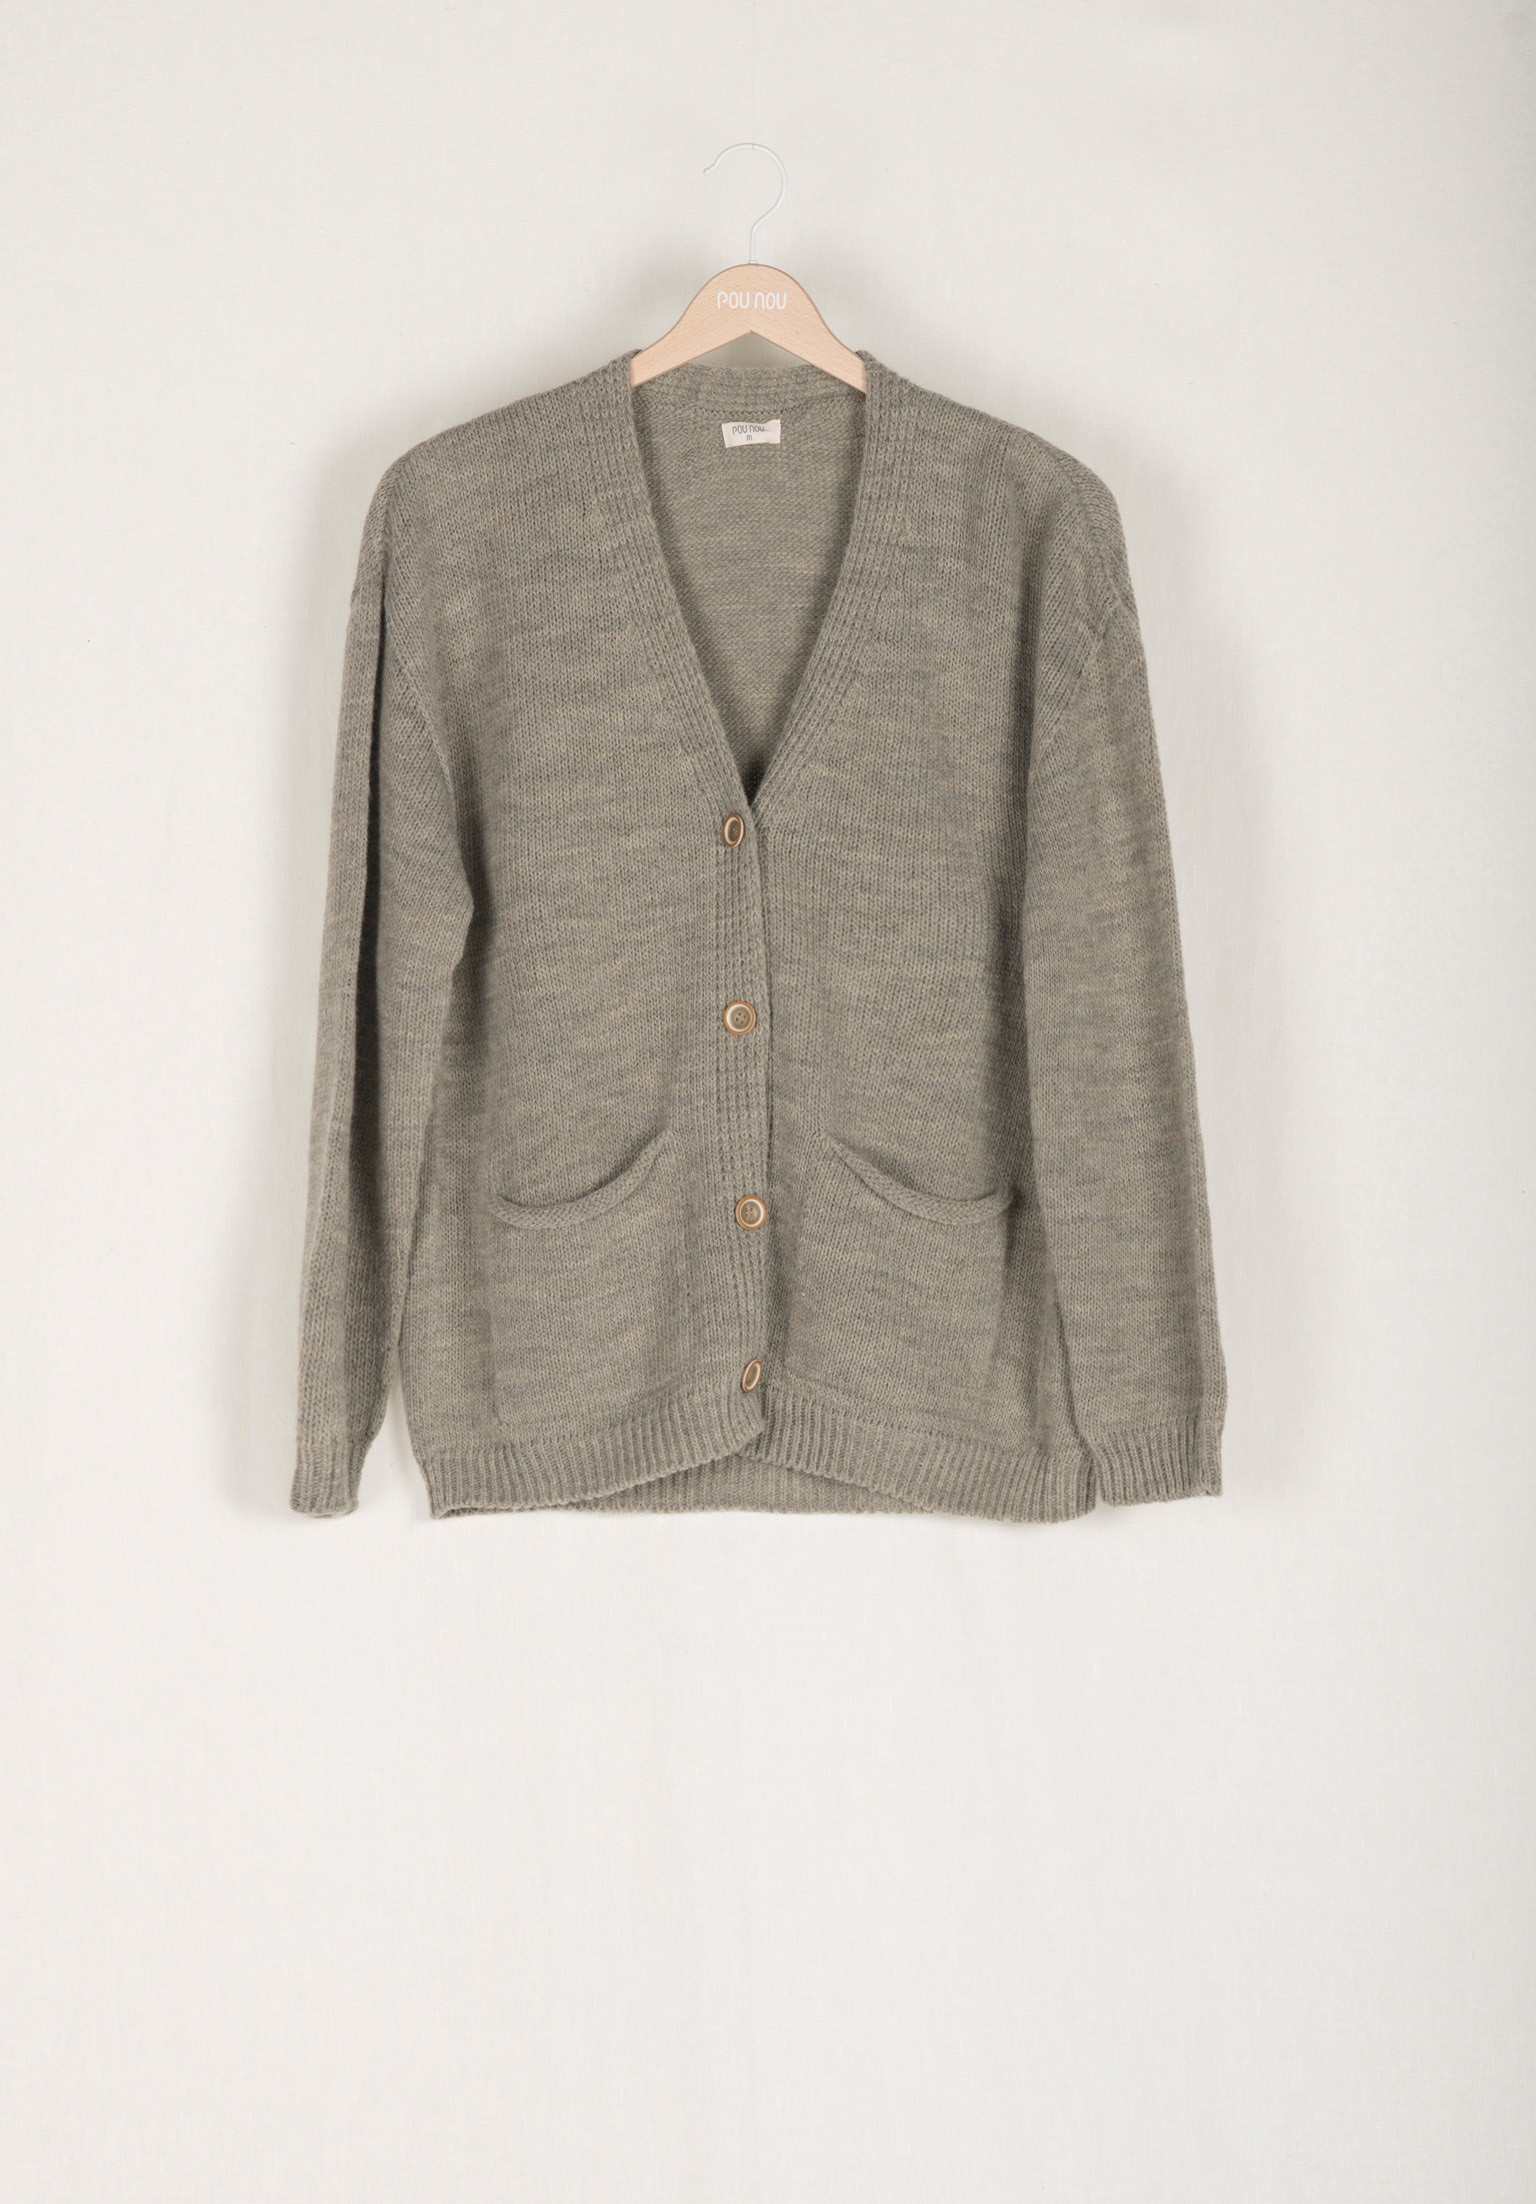 Woollen cardigan with buttons